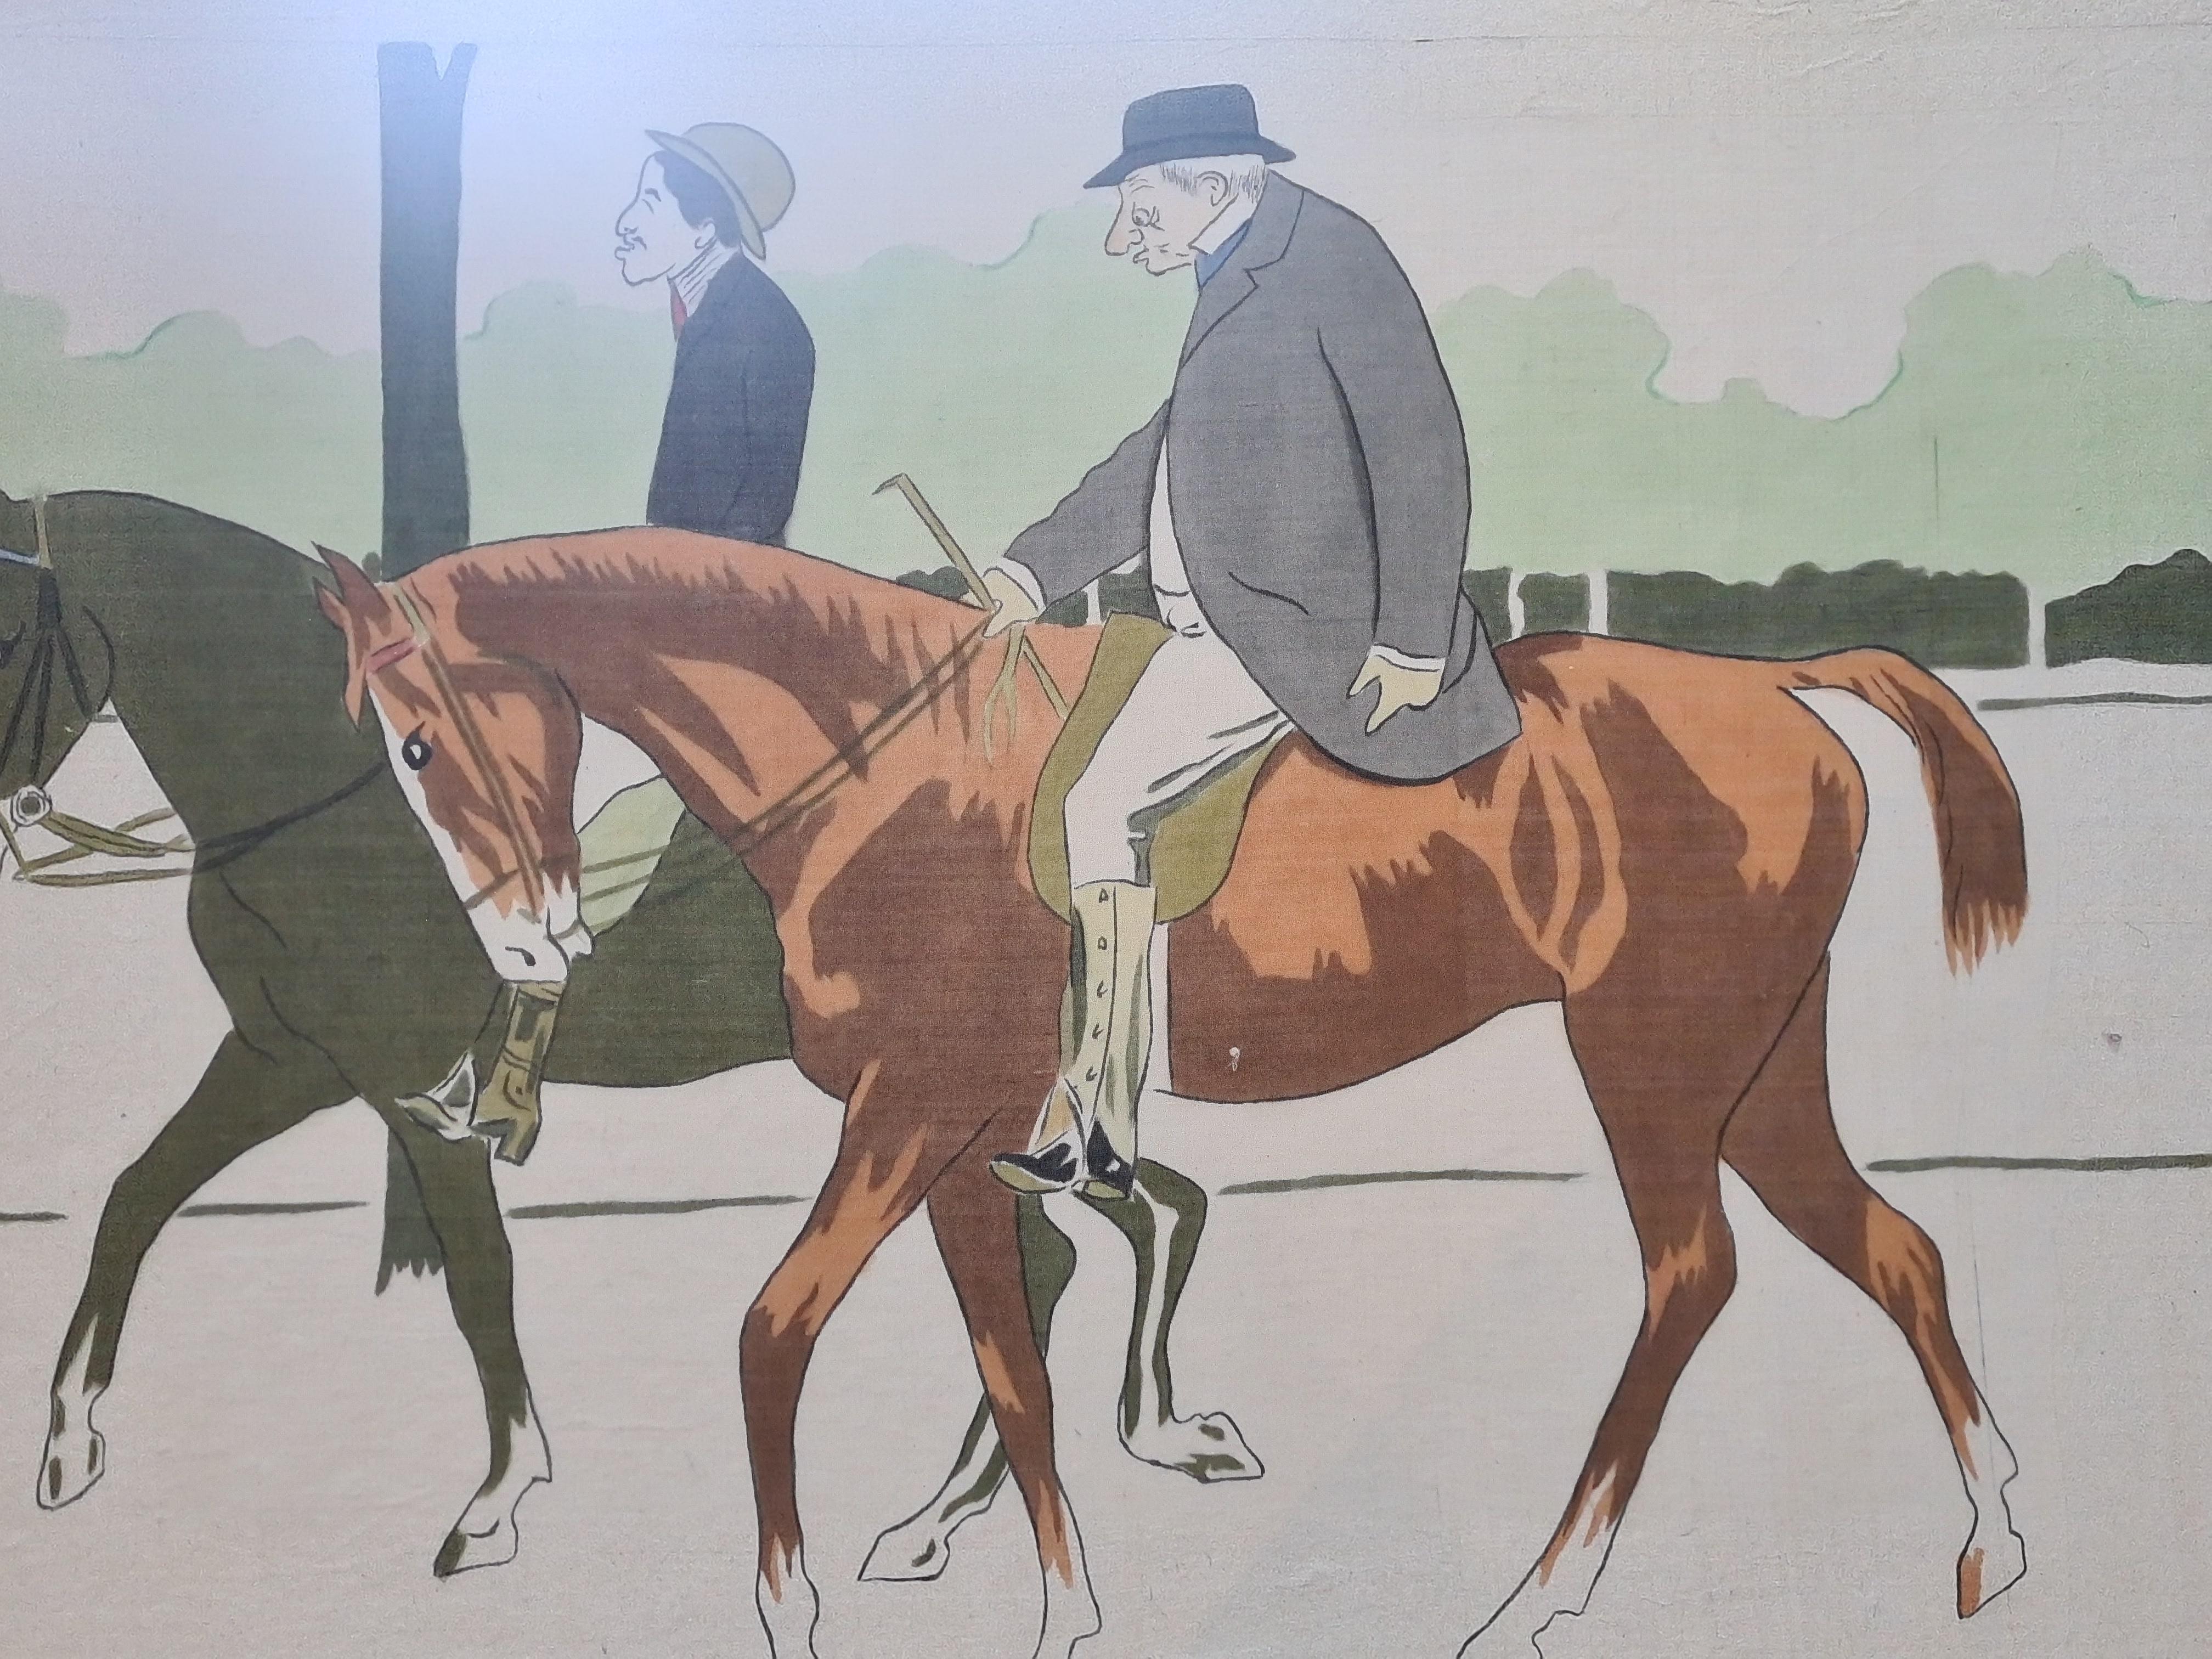 A Ride In The Park, Large Goauche and Watercolour Caricature On Handmade Paper - Gray Animal Art by La Roche Laffitte